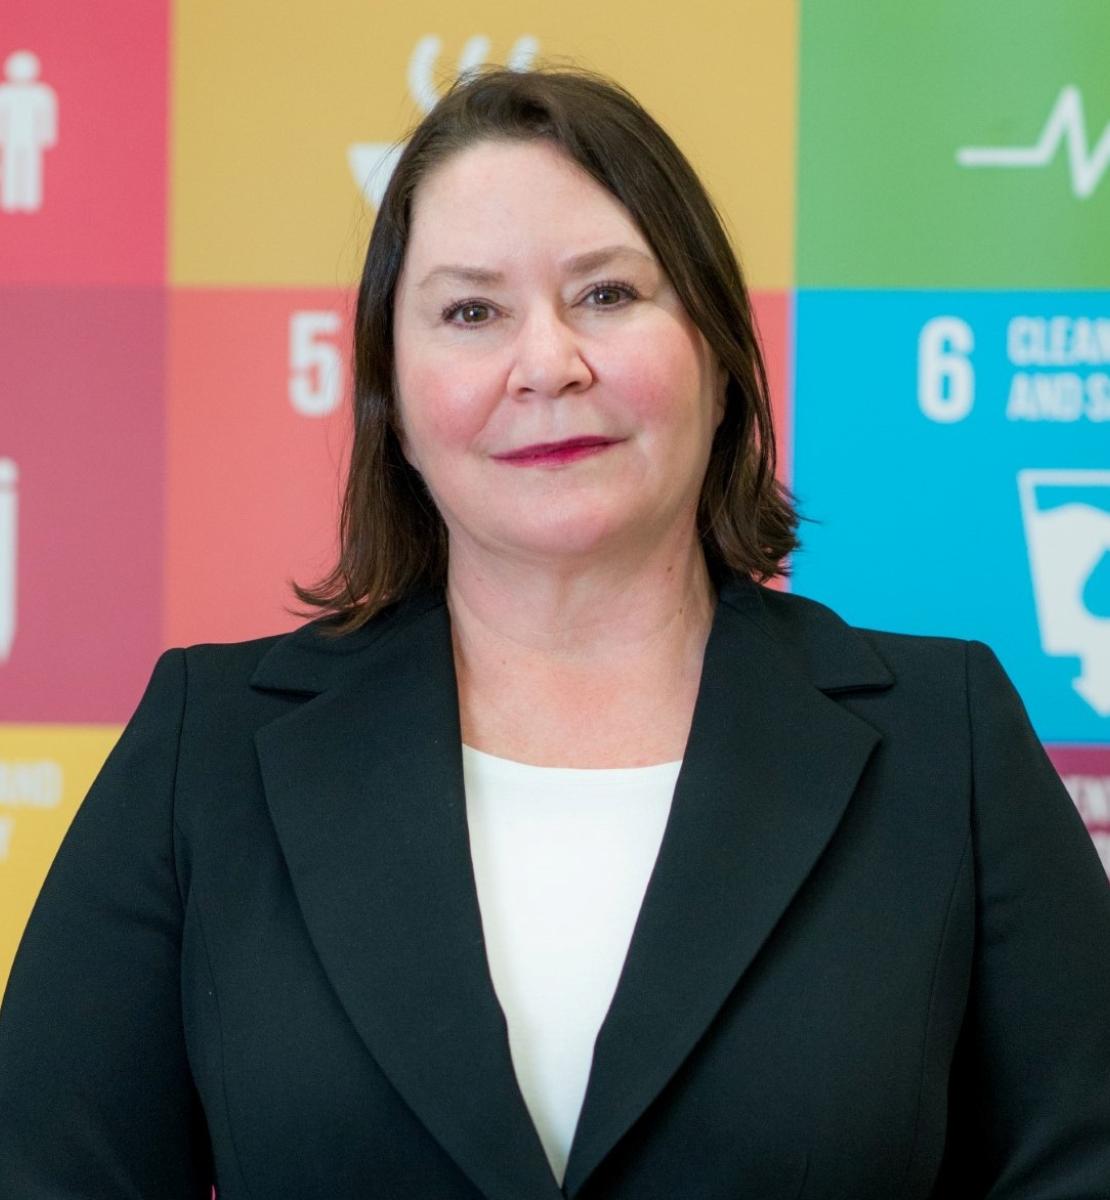 A woman stands in front of a sign with SDG logos on it. 